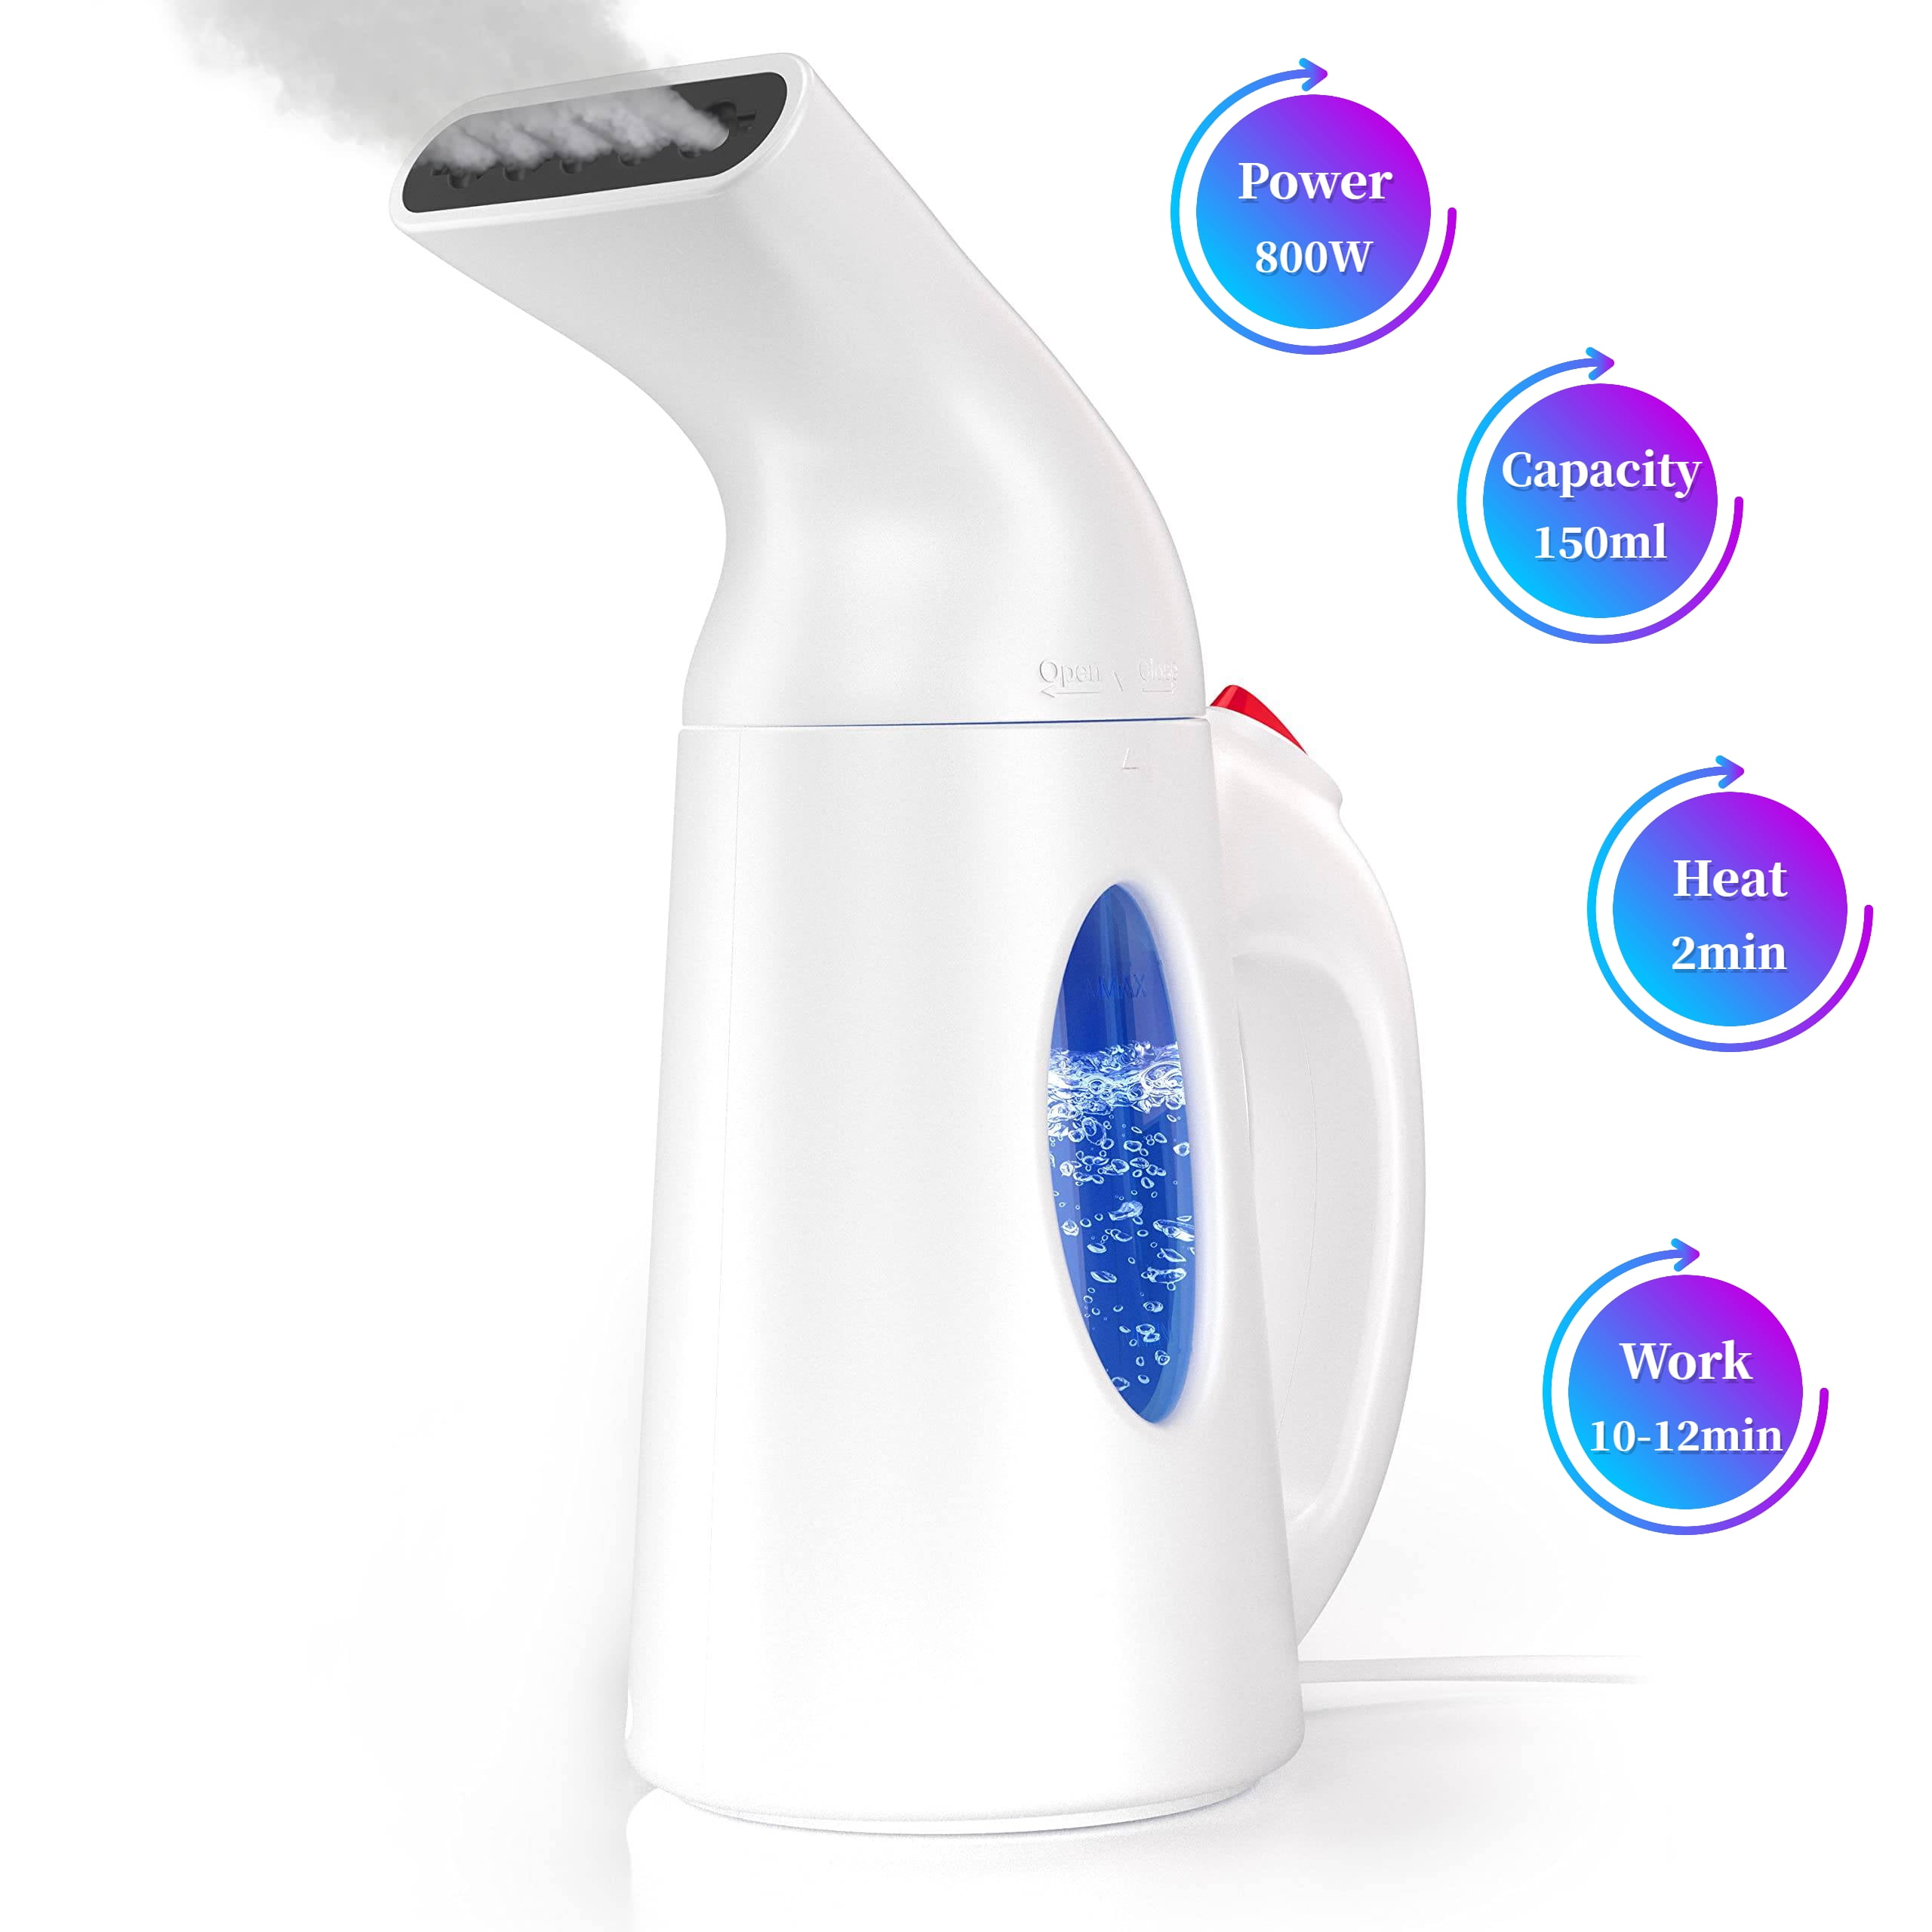 Clothes steamer SteamOne S-Travel 150